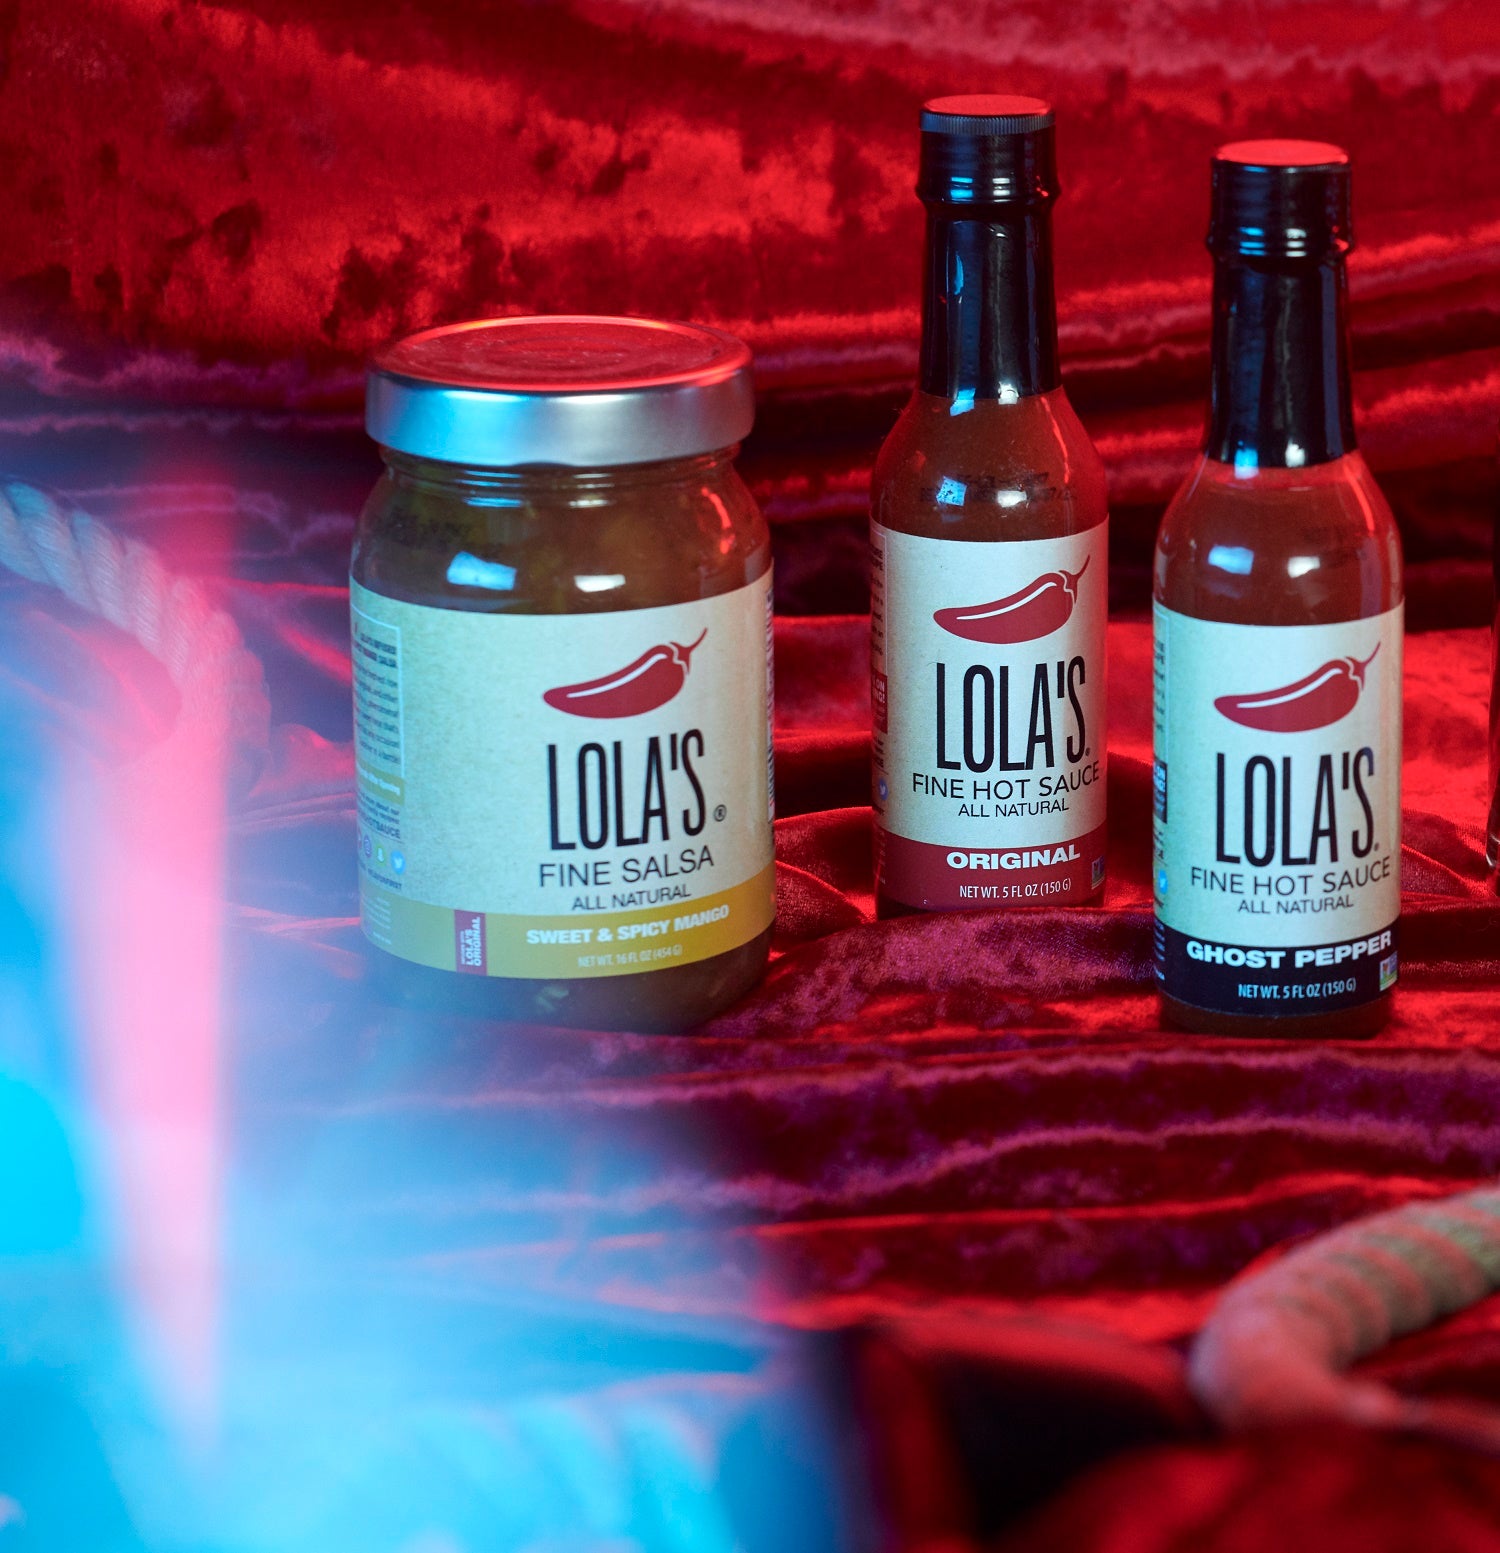 Spice Up Your Life With Lola's Fine Hot Sauce - SWAGGER Magazine